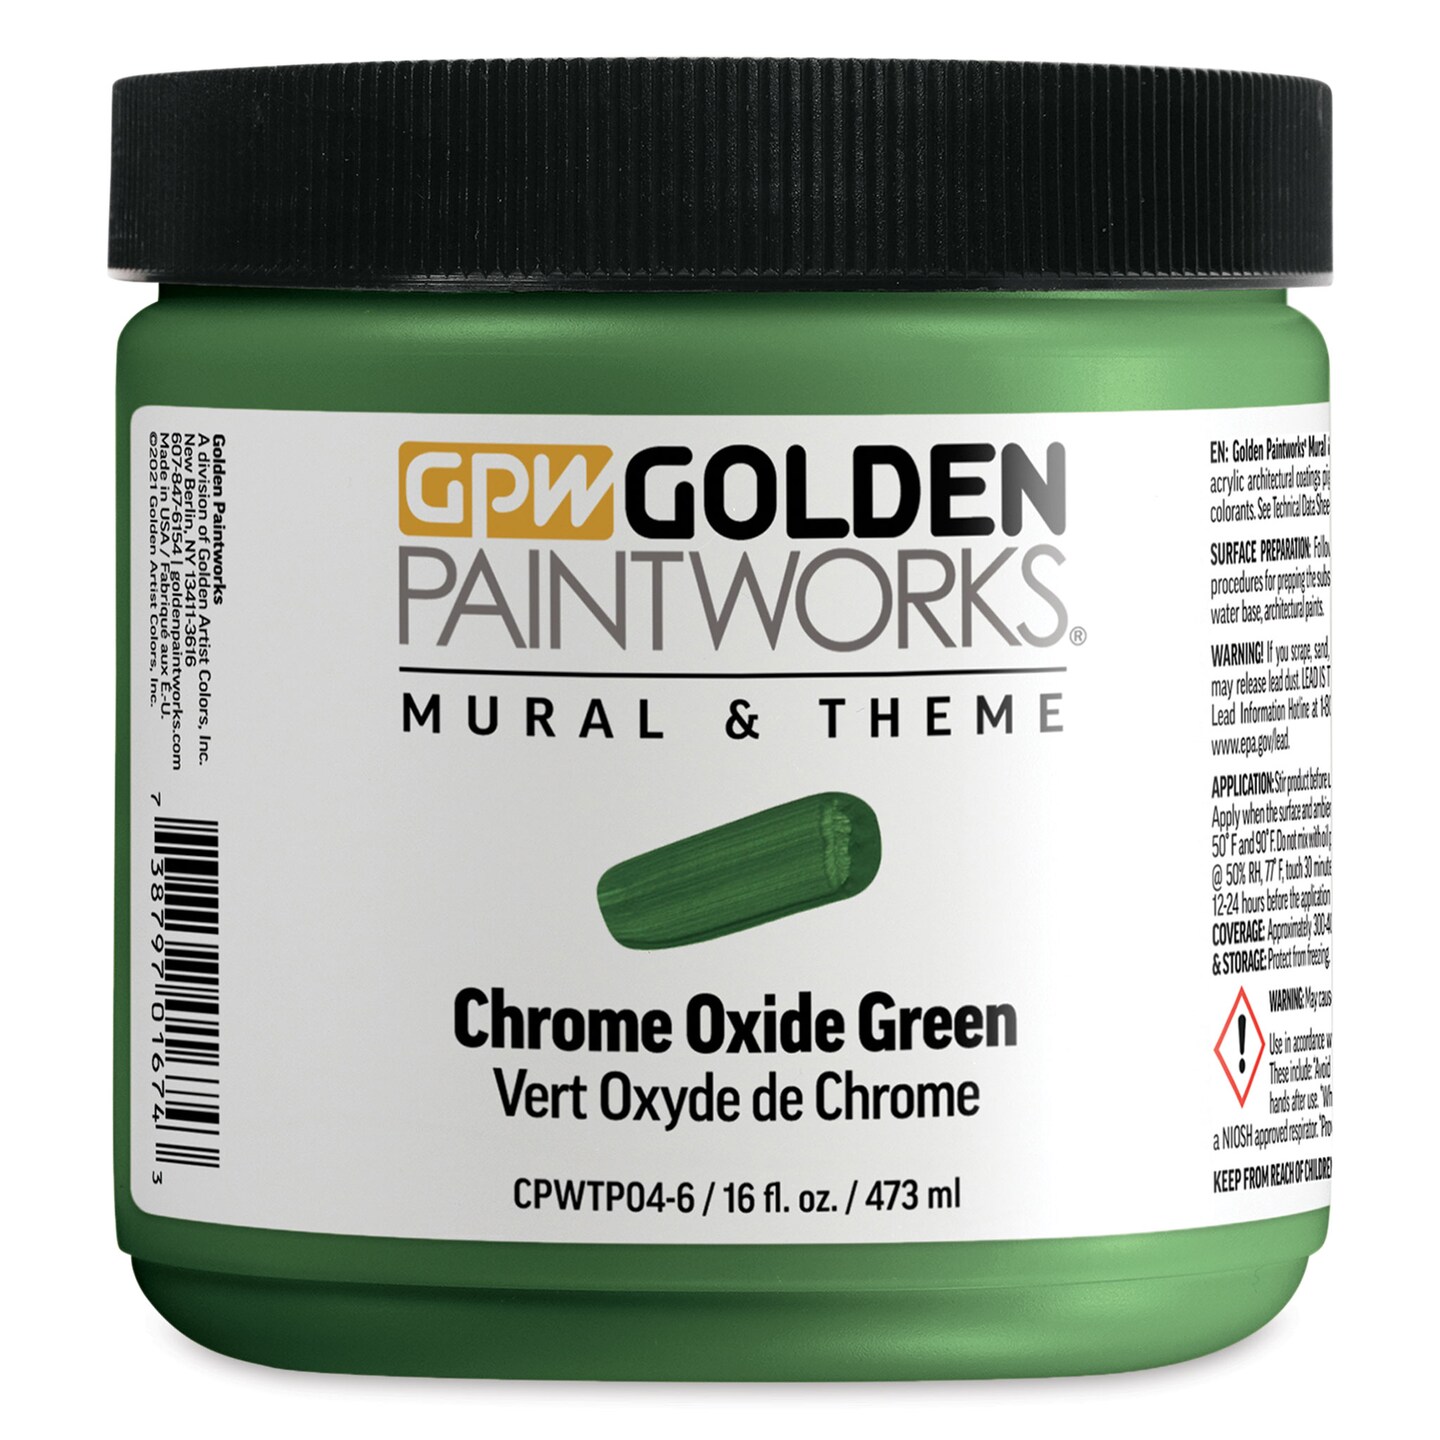 Golden Paintworks Mural and Theme Acrylic Paint - Chrome Oxide Green, 16 oz, Jar